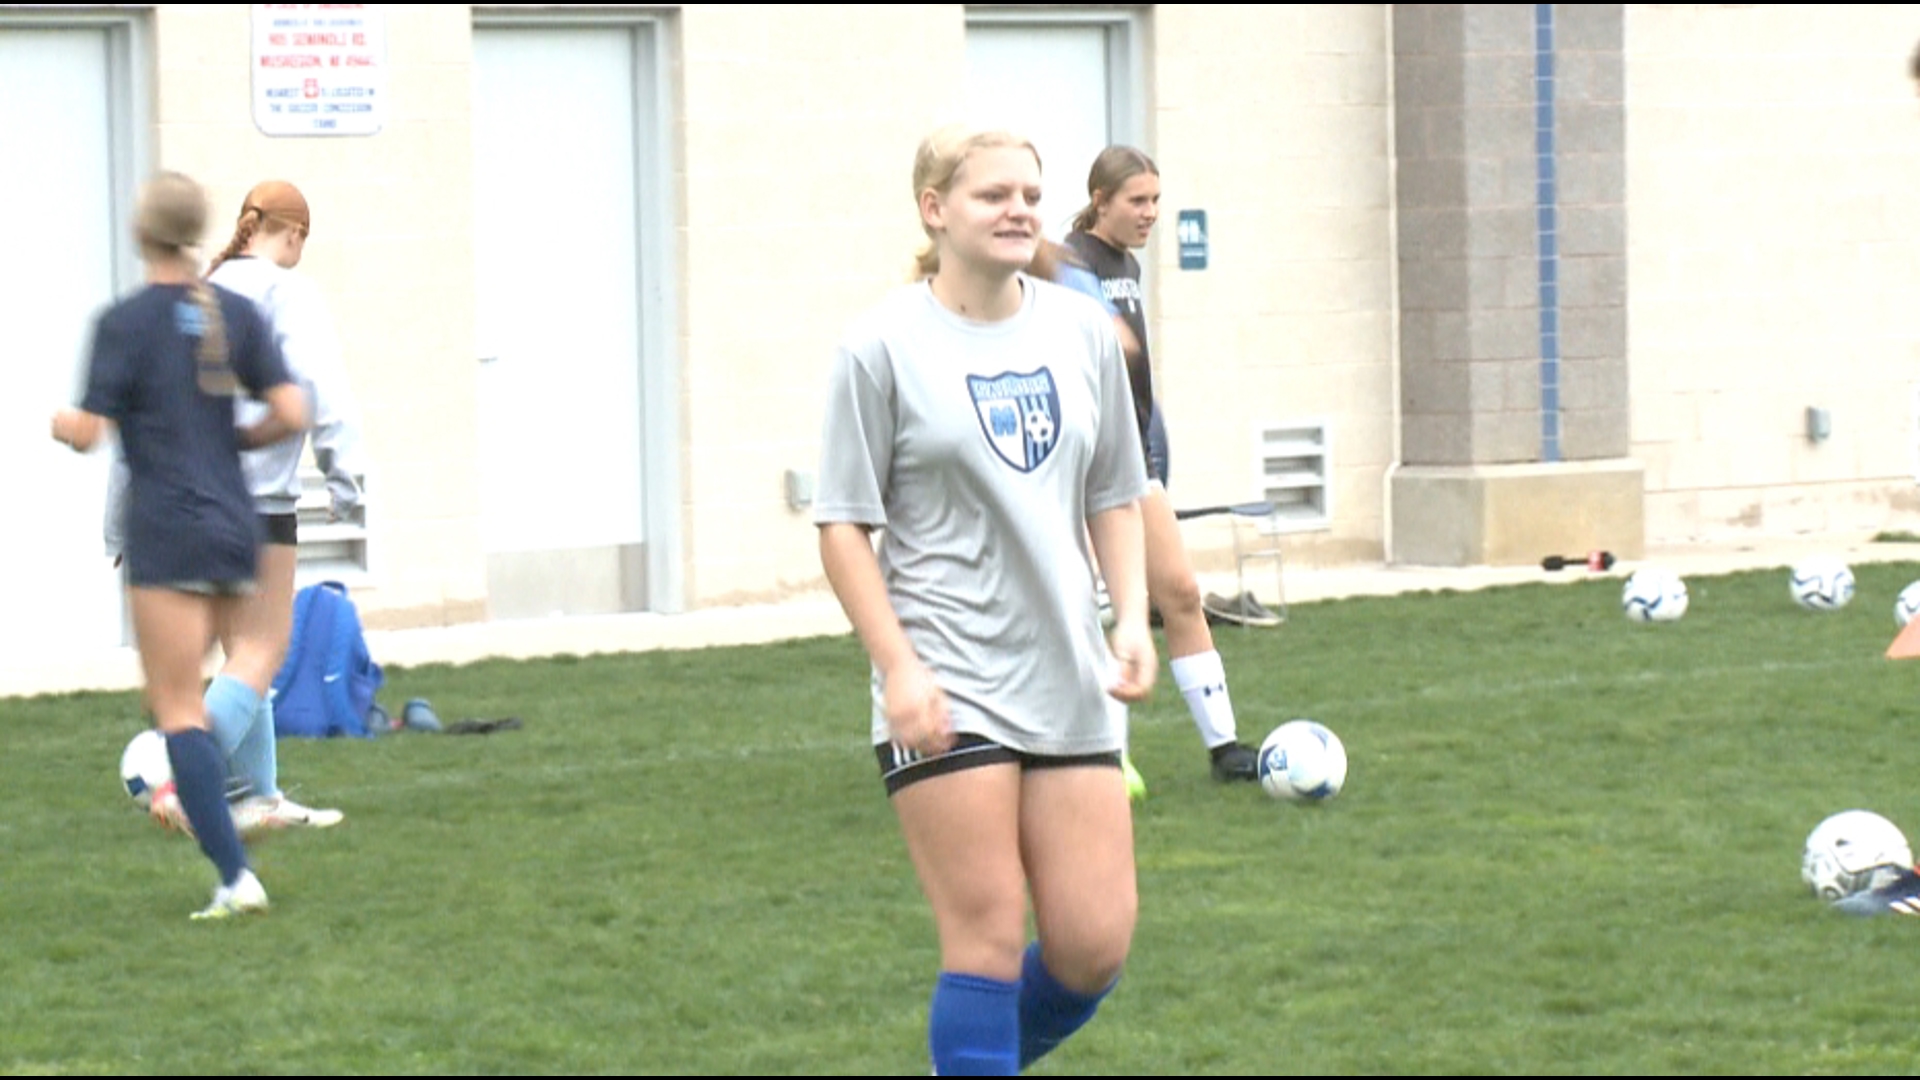 Freye is a star for the Mona Shore's soccer and basketball team, while maintaining a GPA over 4.0.